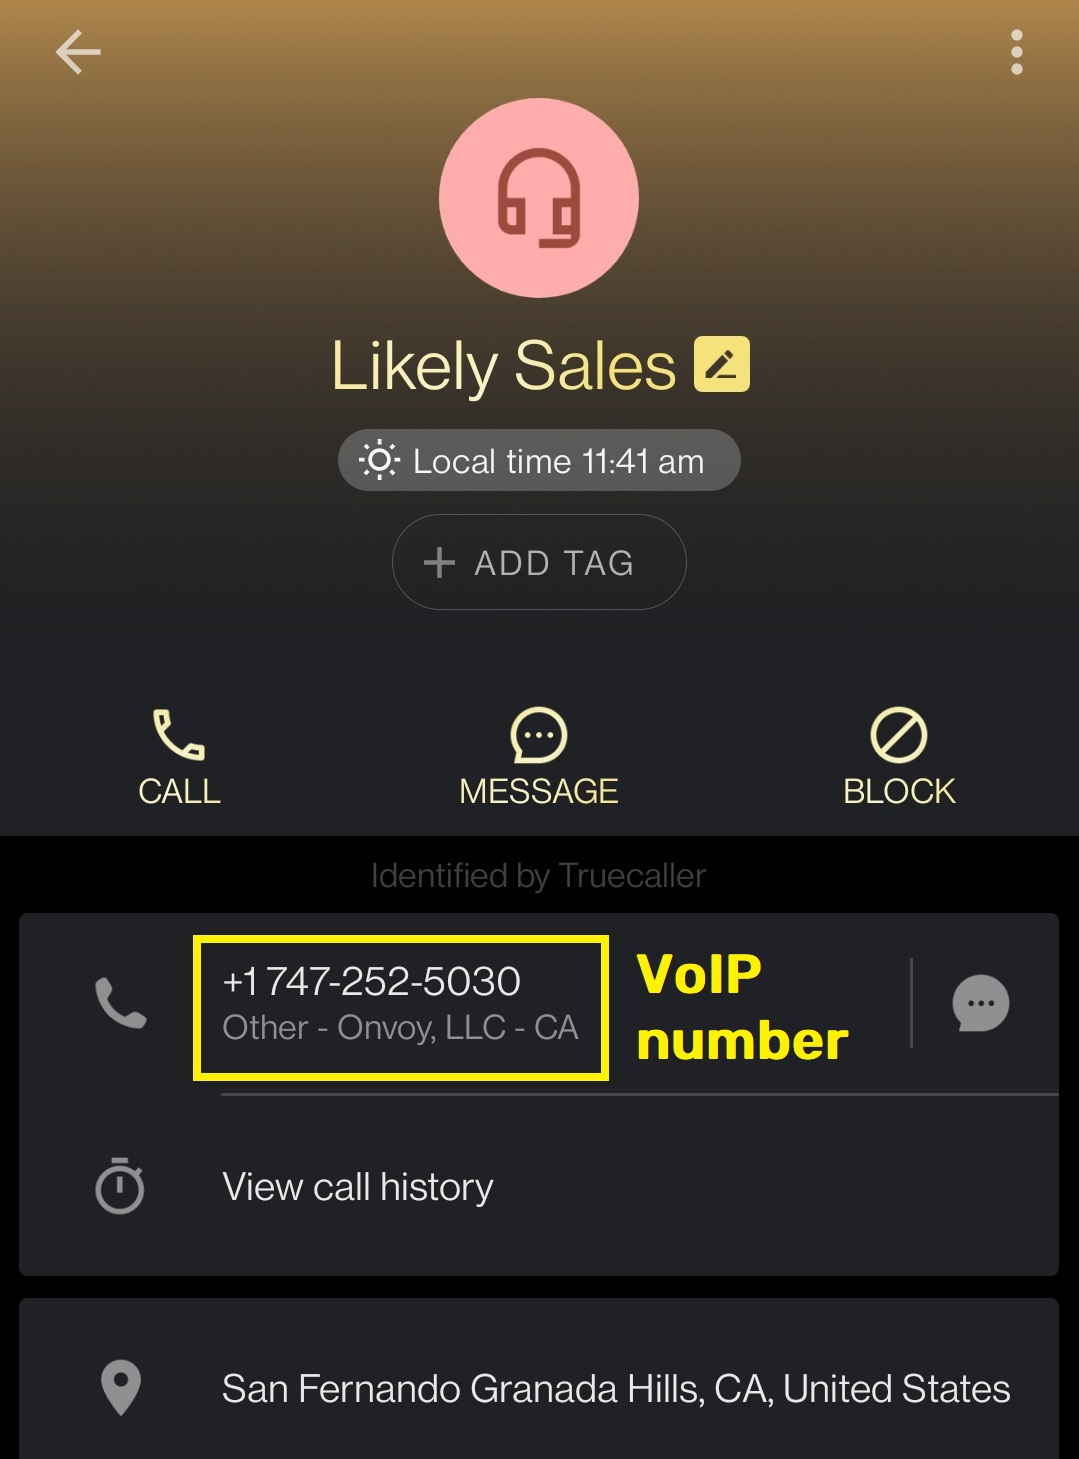 Bluevaultsecure.net scam fake phone number